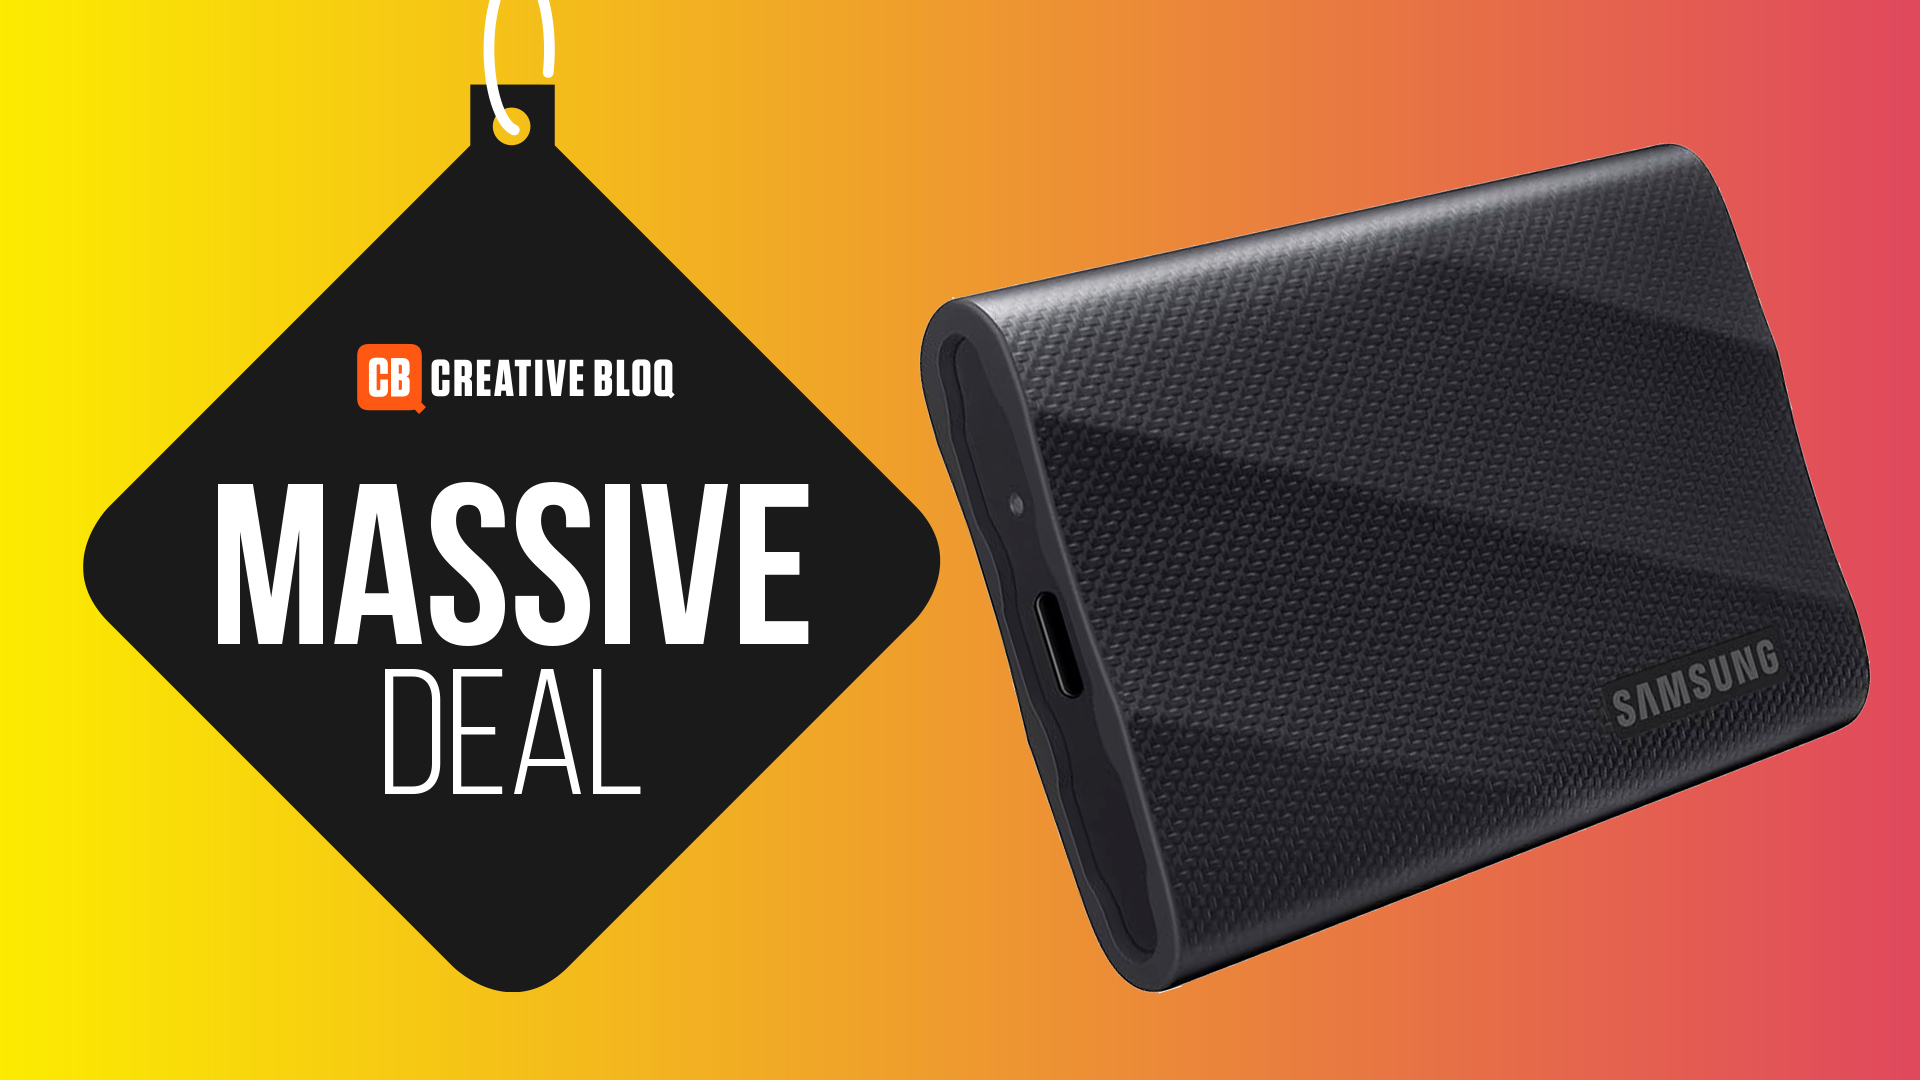 1TB Samsung T5 Portable SSD Discounted To $137.99 Just For Black Friday  Week [Originally $250]